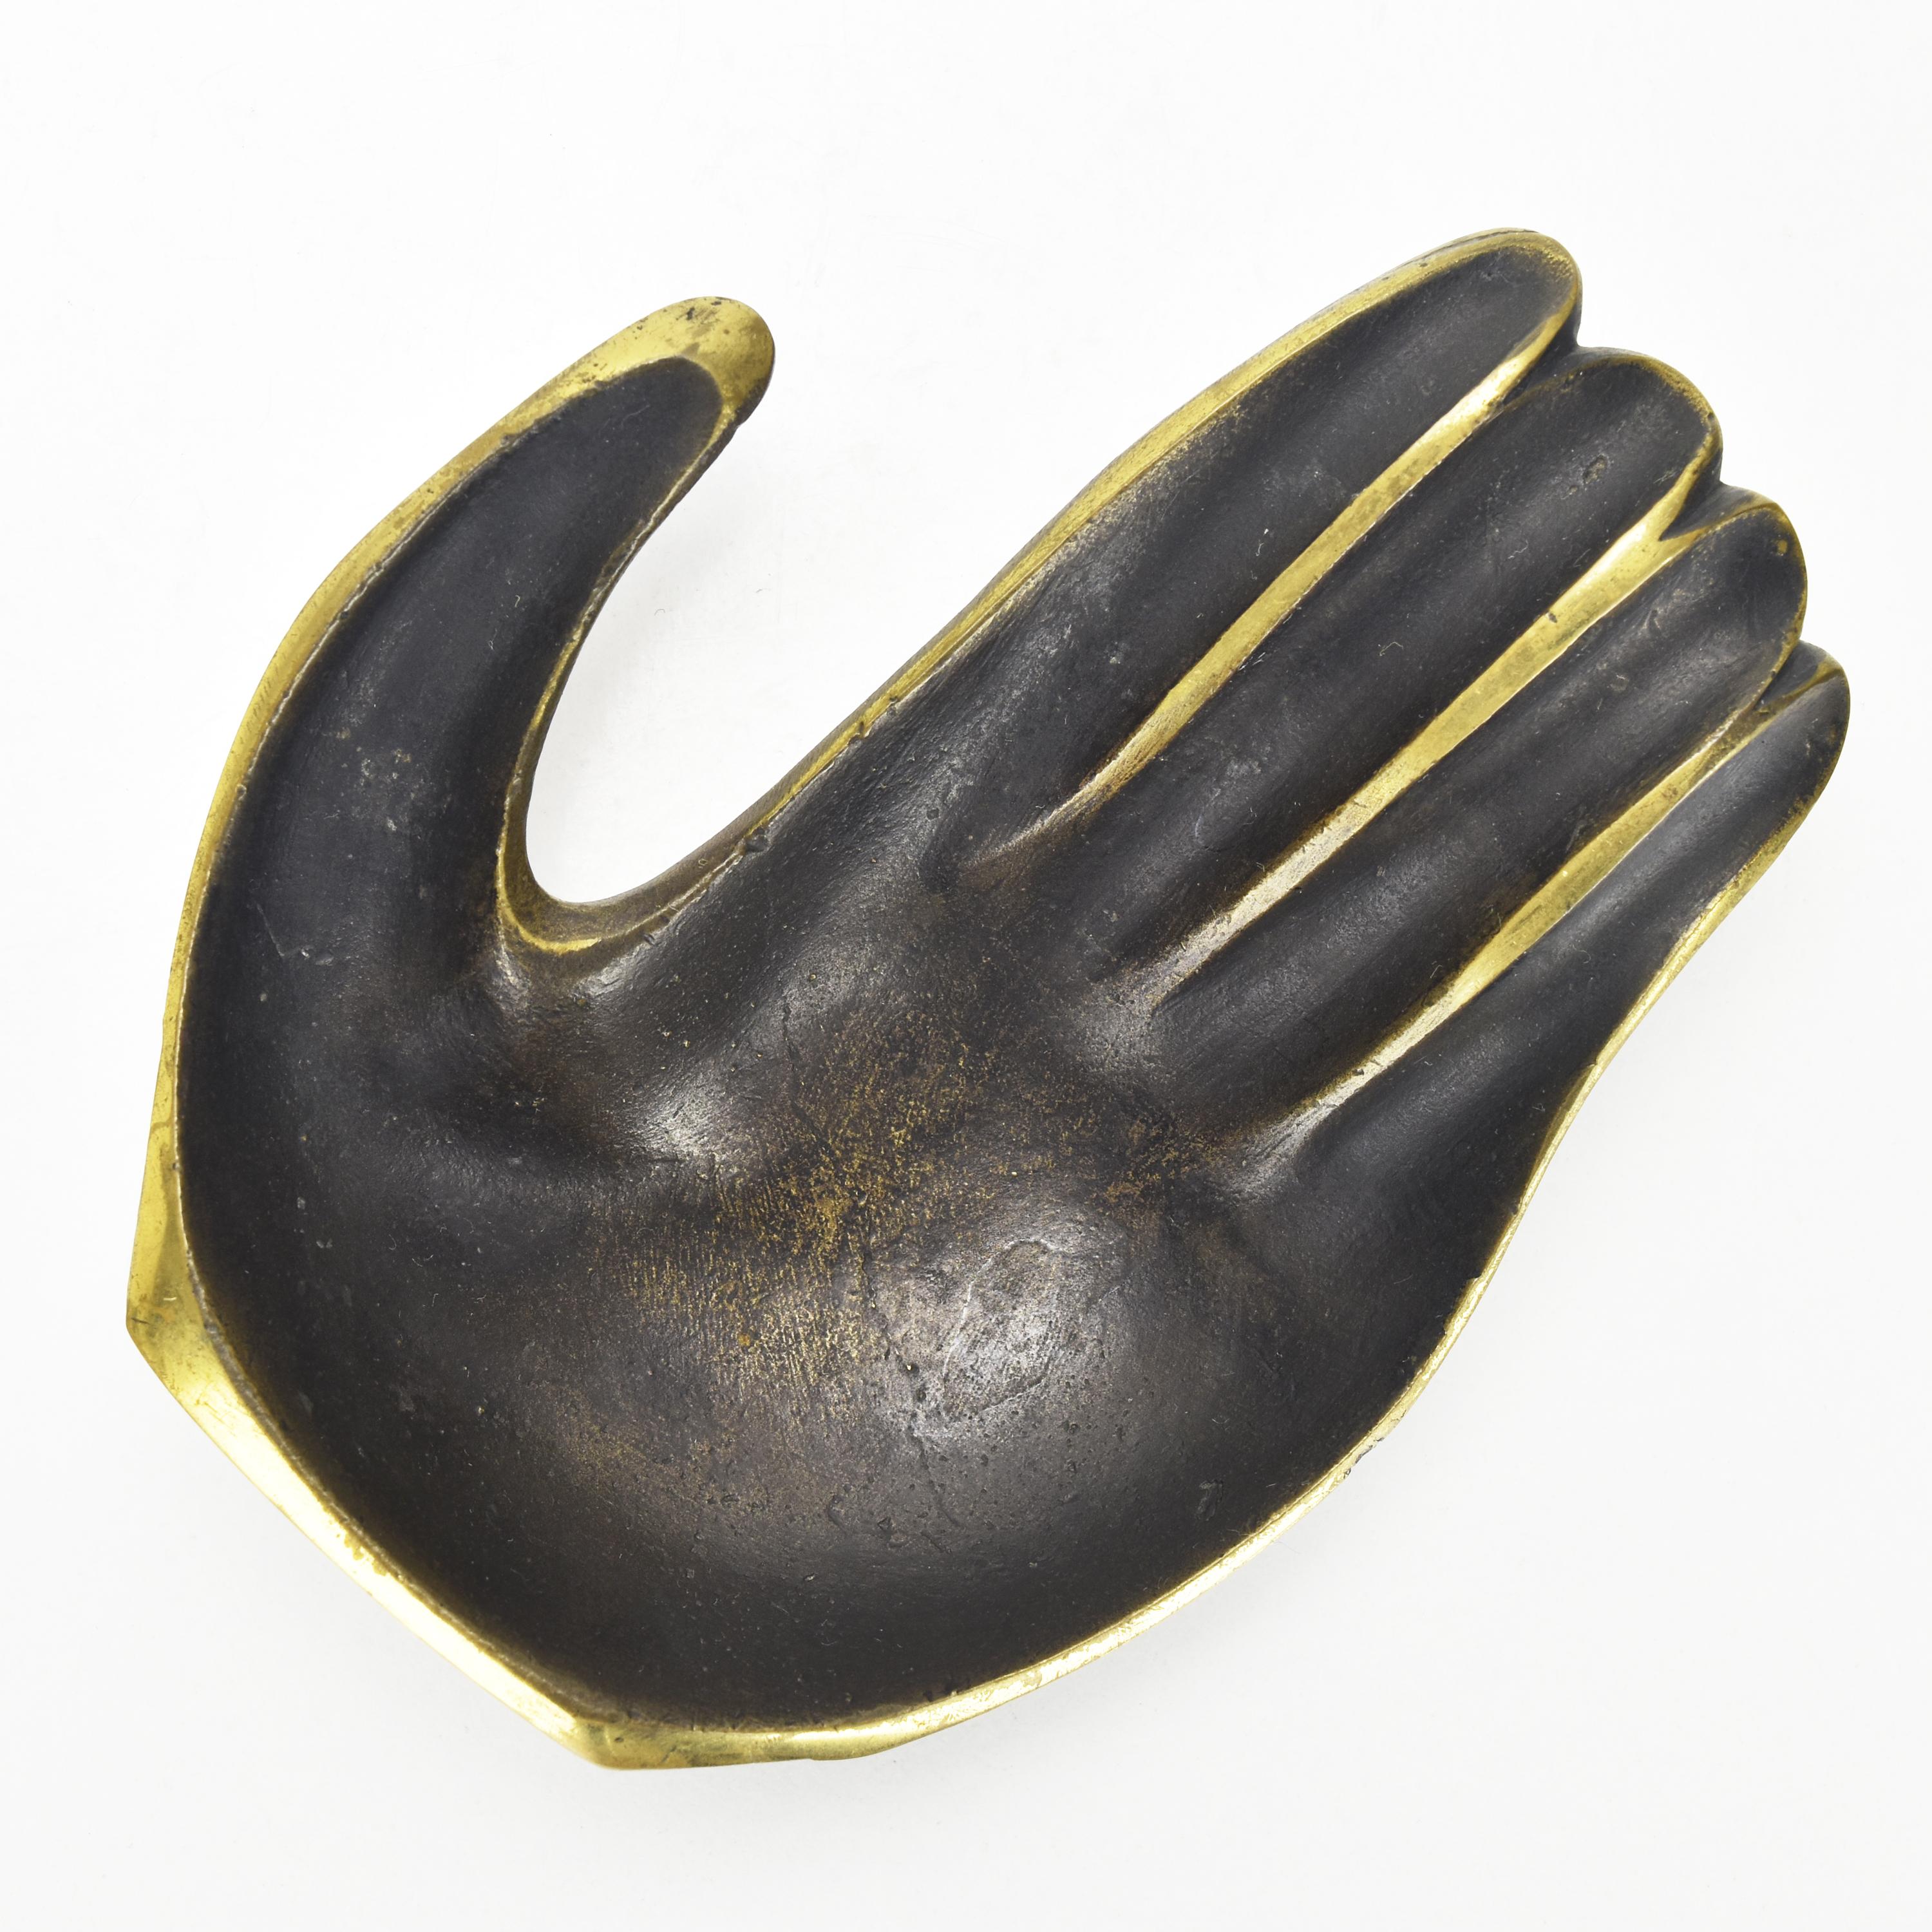 A beautiful modernist vide poche or ashtray in the shape of a hand designed by Walter Bosse and probably executed by Herta Baller Austria in the 1950s. 